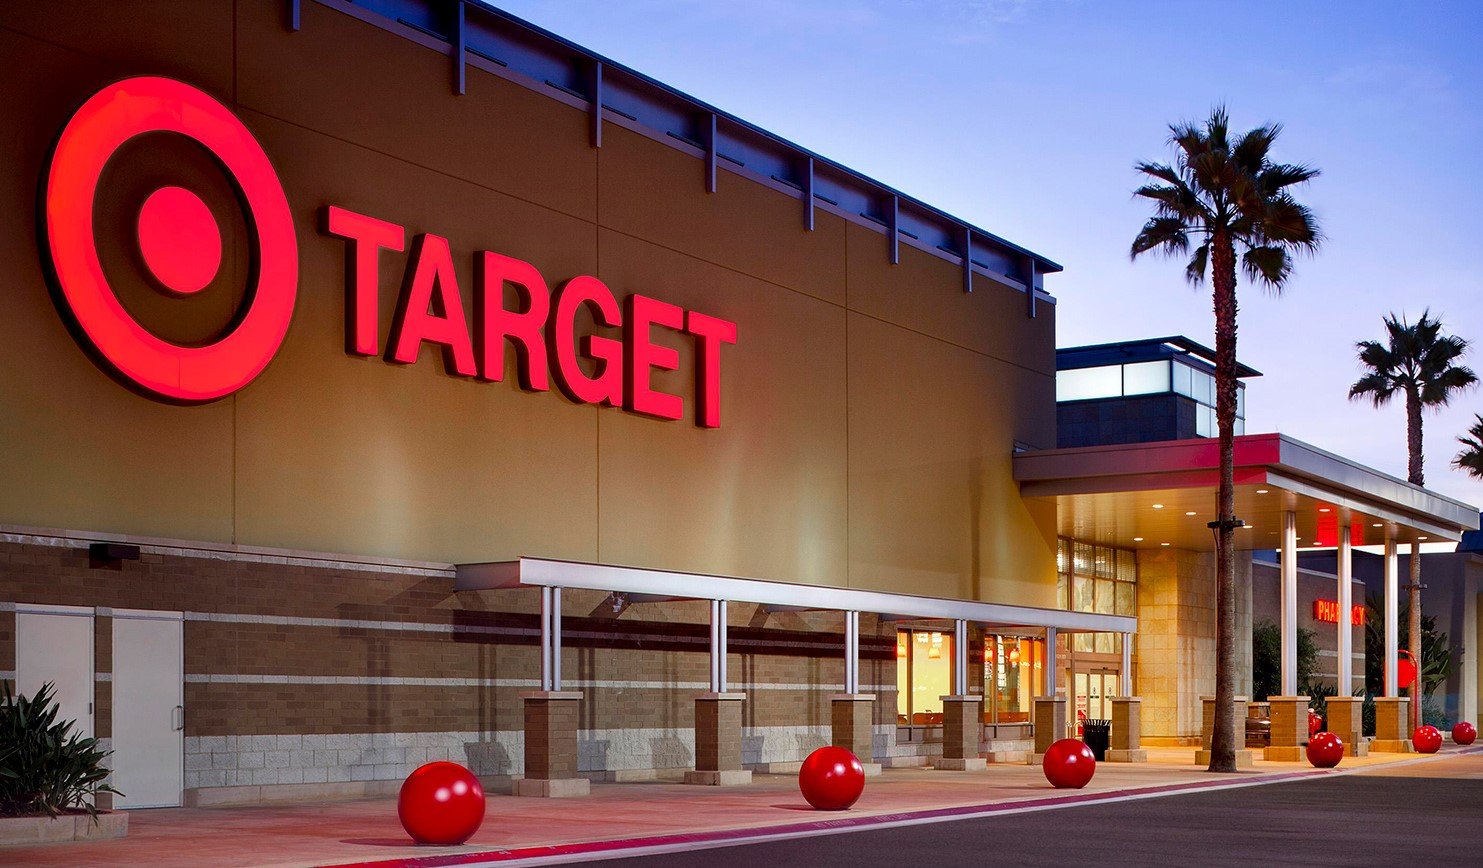 Marketing Strategy of Target Corporation